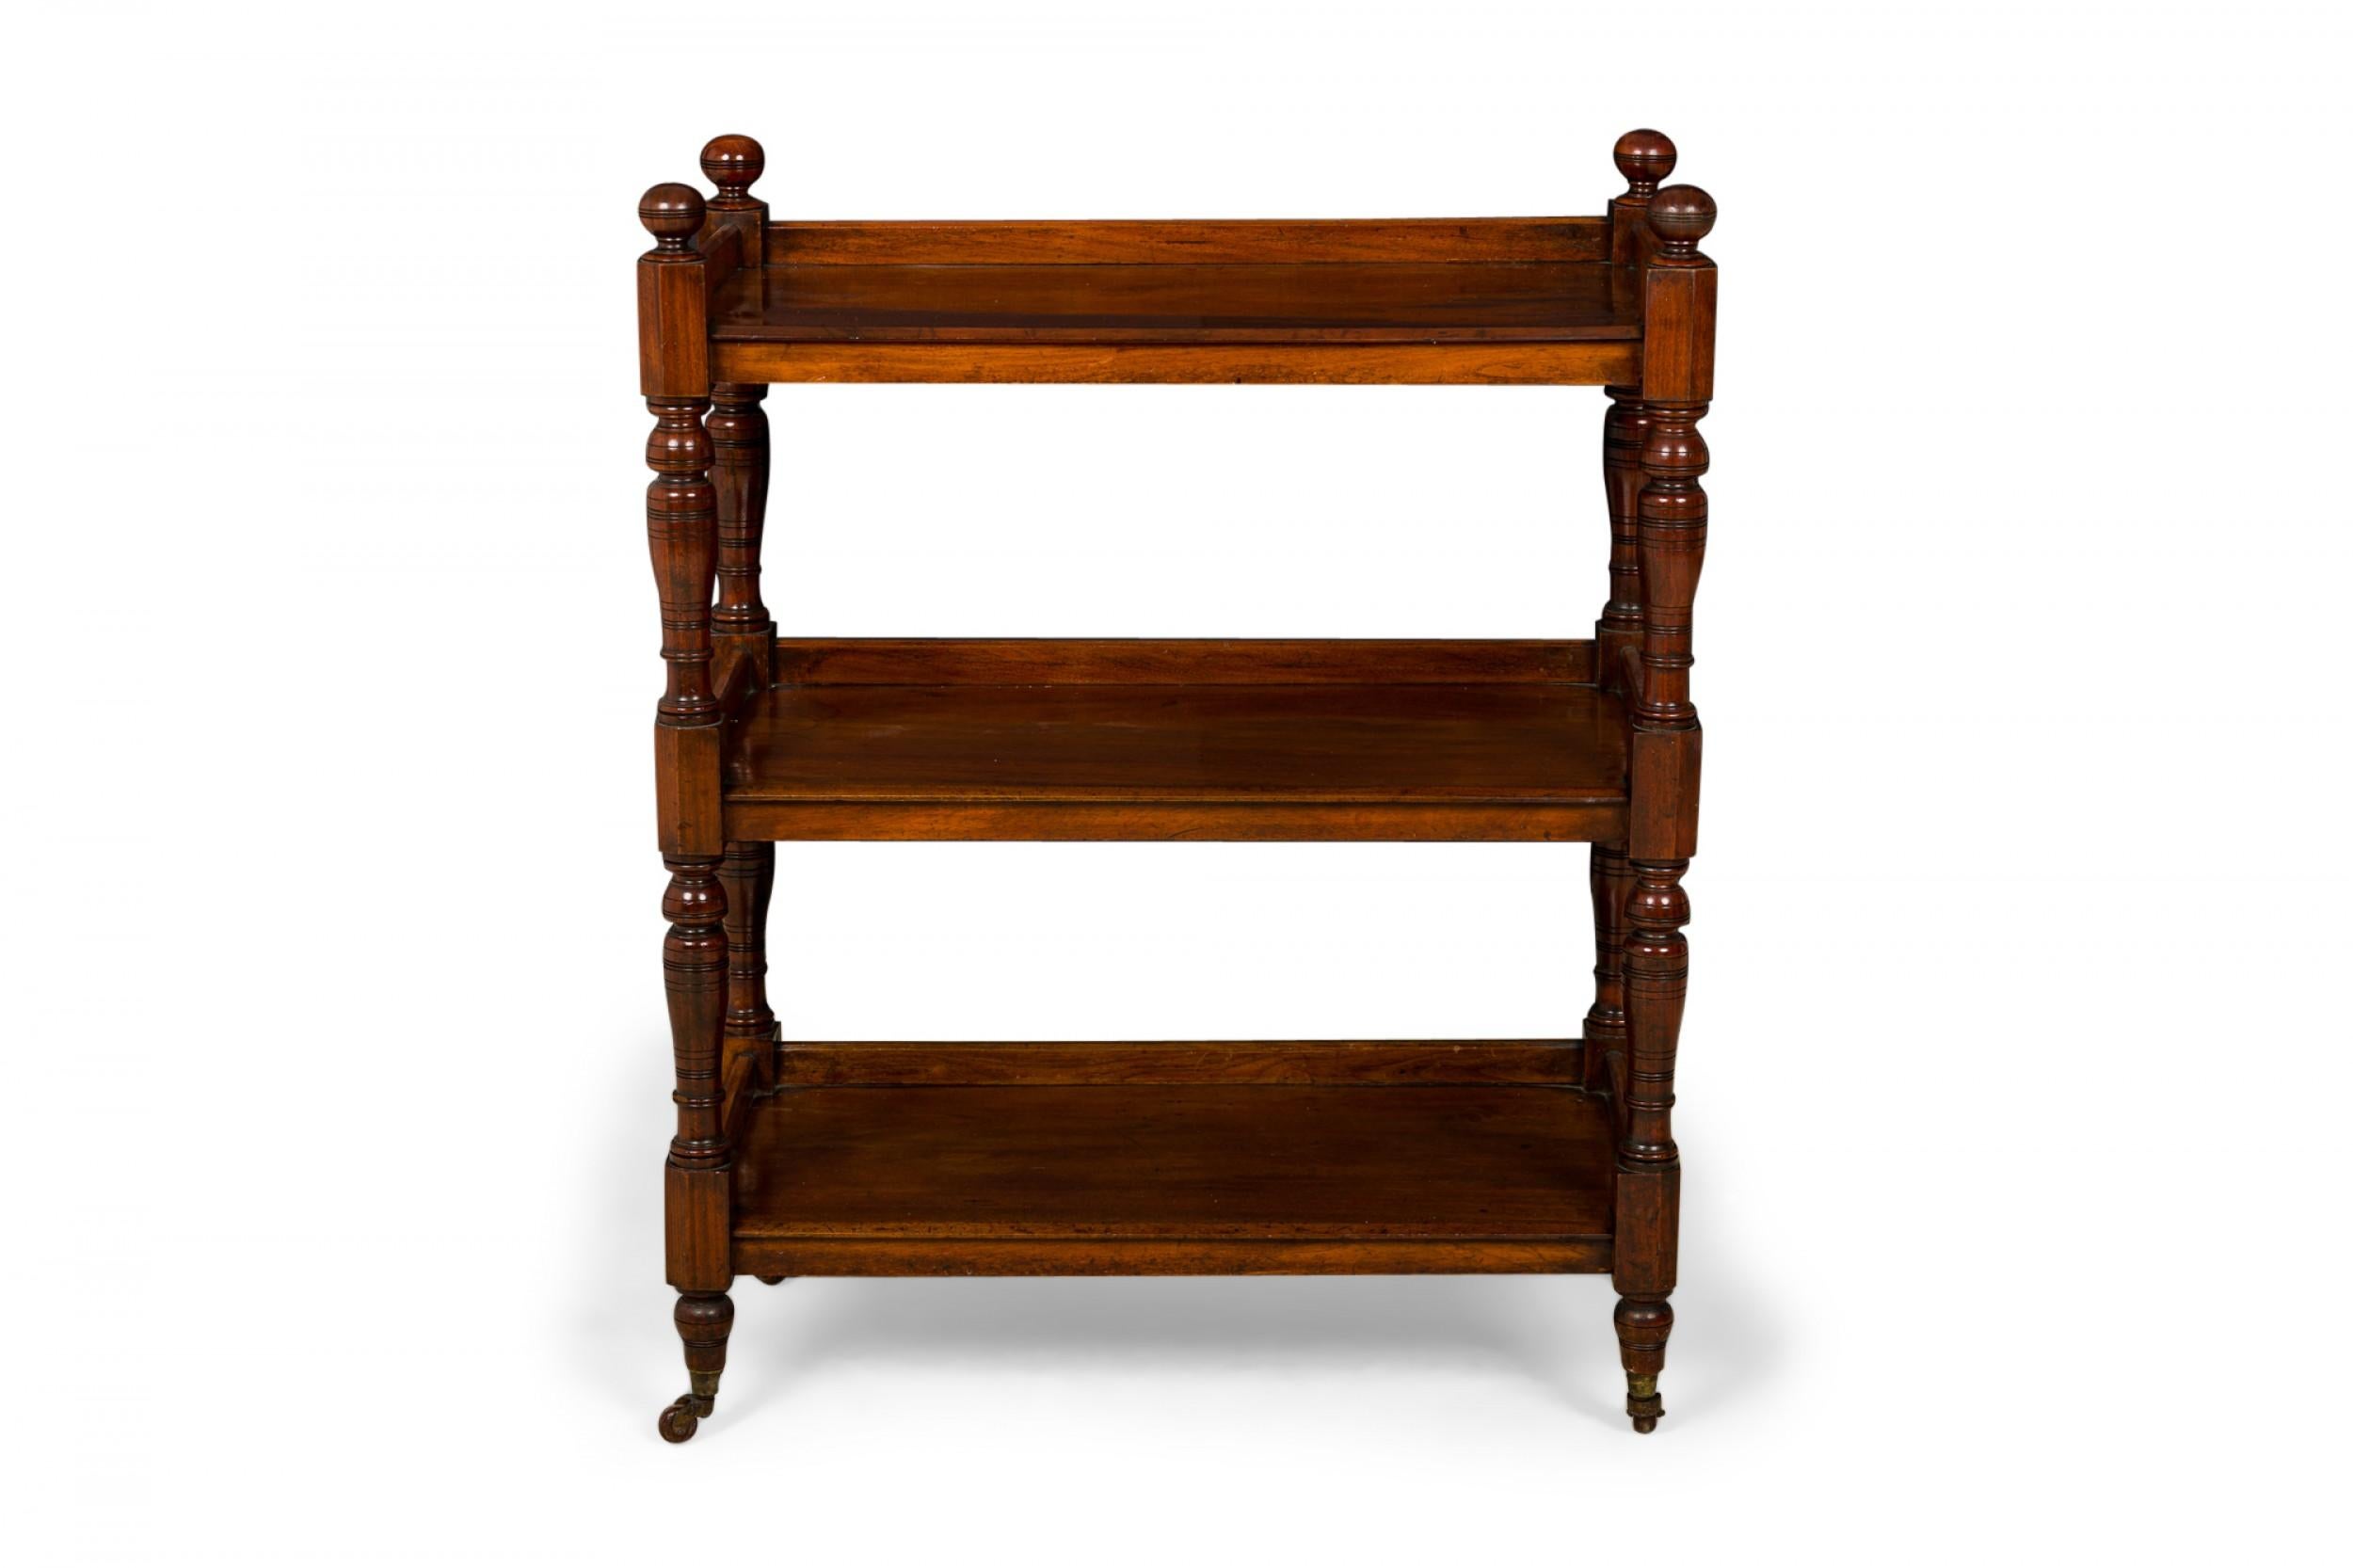 English Victorian (19th century) three-tier etagere / display shelf with three wooden rectangular shelves with low wooden galleries around three sides, supported at each corner by turned legs topped with ball finials and ending in small brass